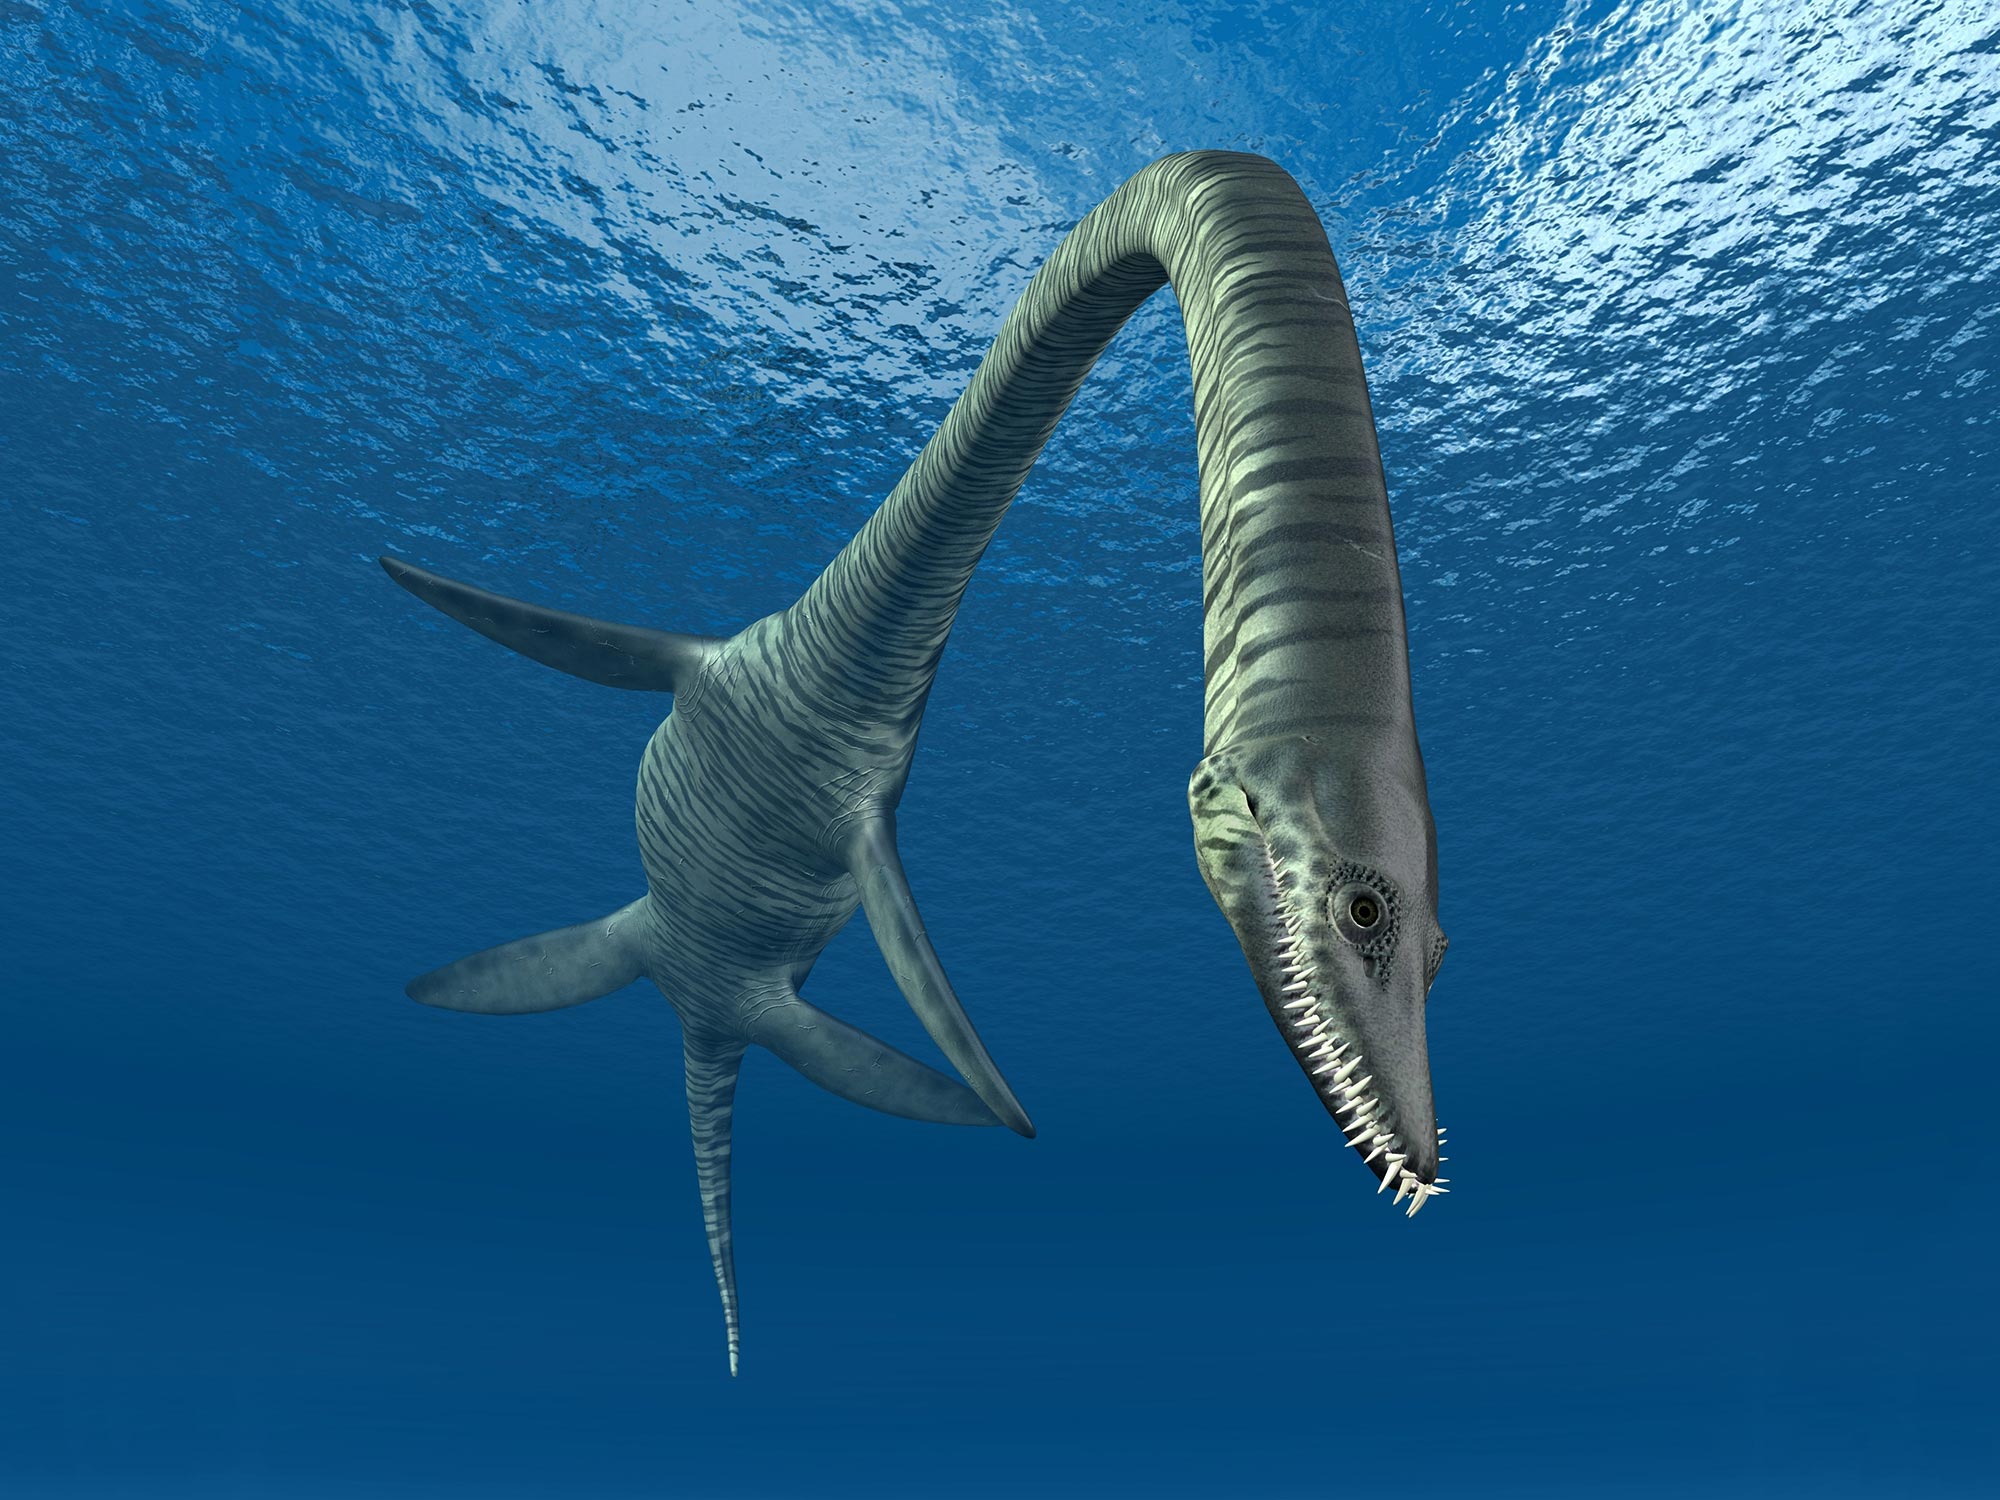 Large Bodies Helped Ancient Sea Monsters With Extremely Long Necks Swim